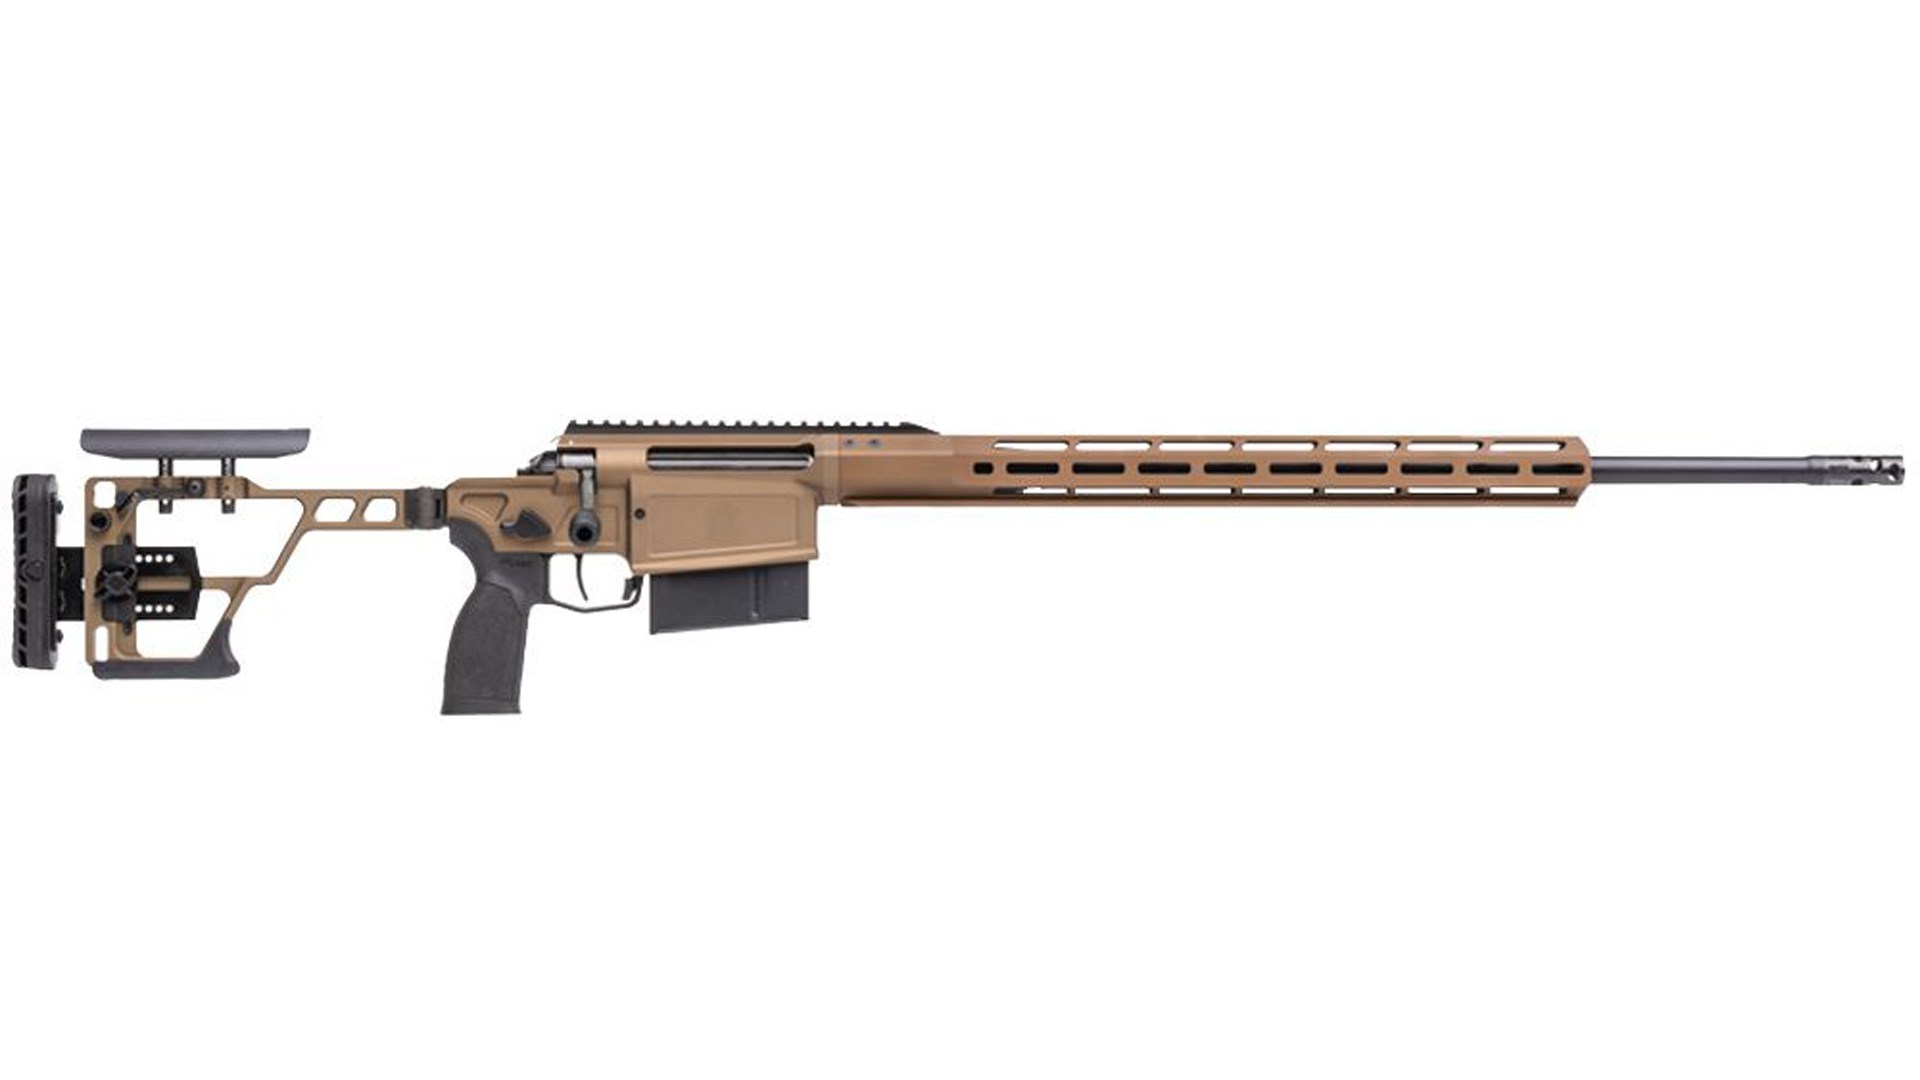 Right side of the tan-colored SIG Sauer Cross Magnum rifle.